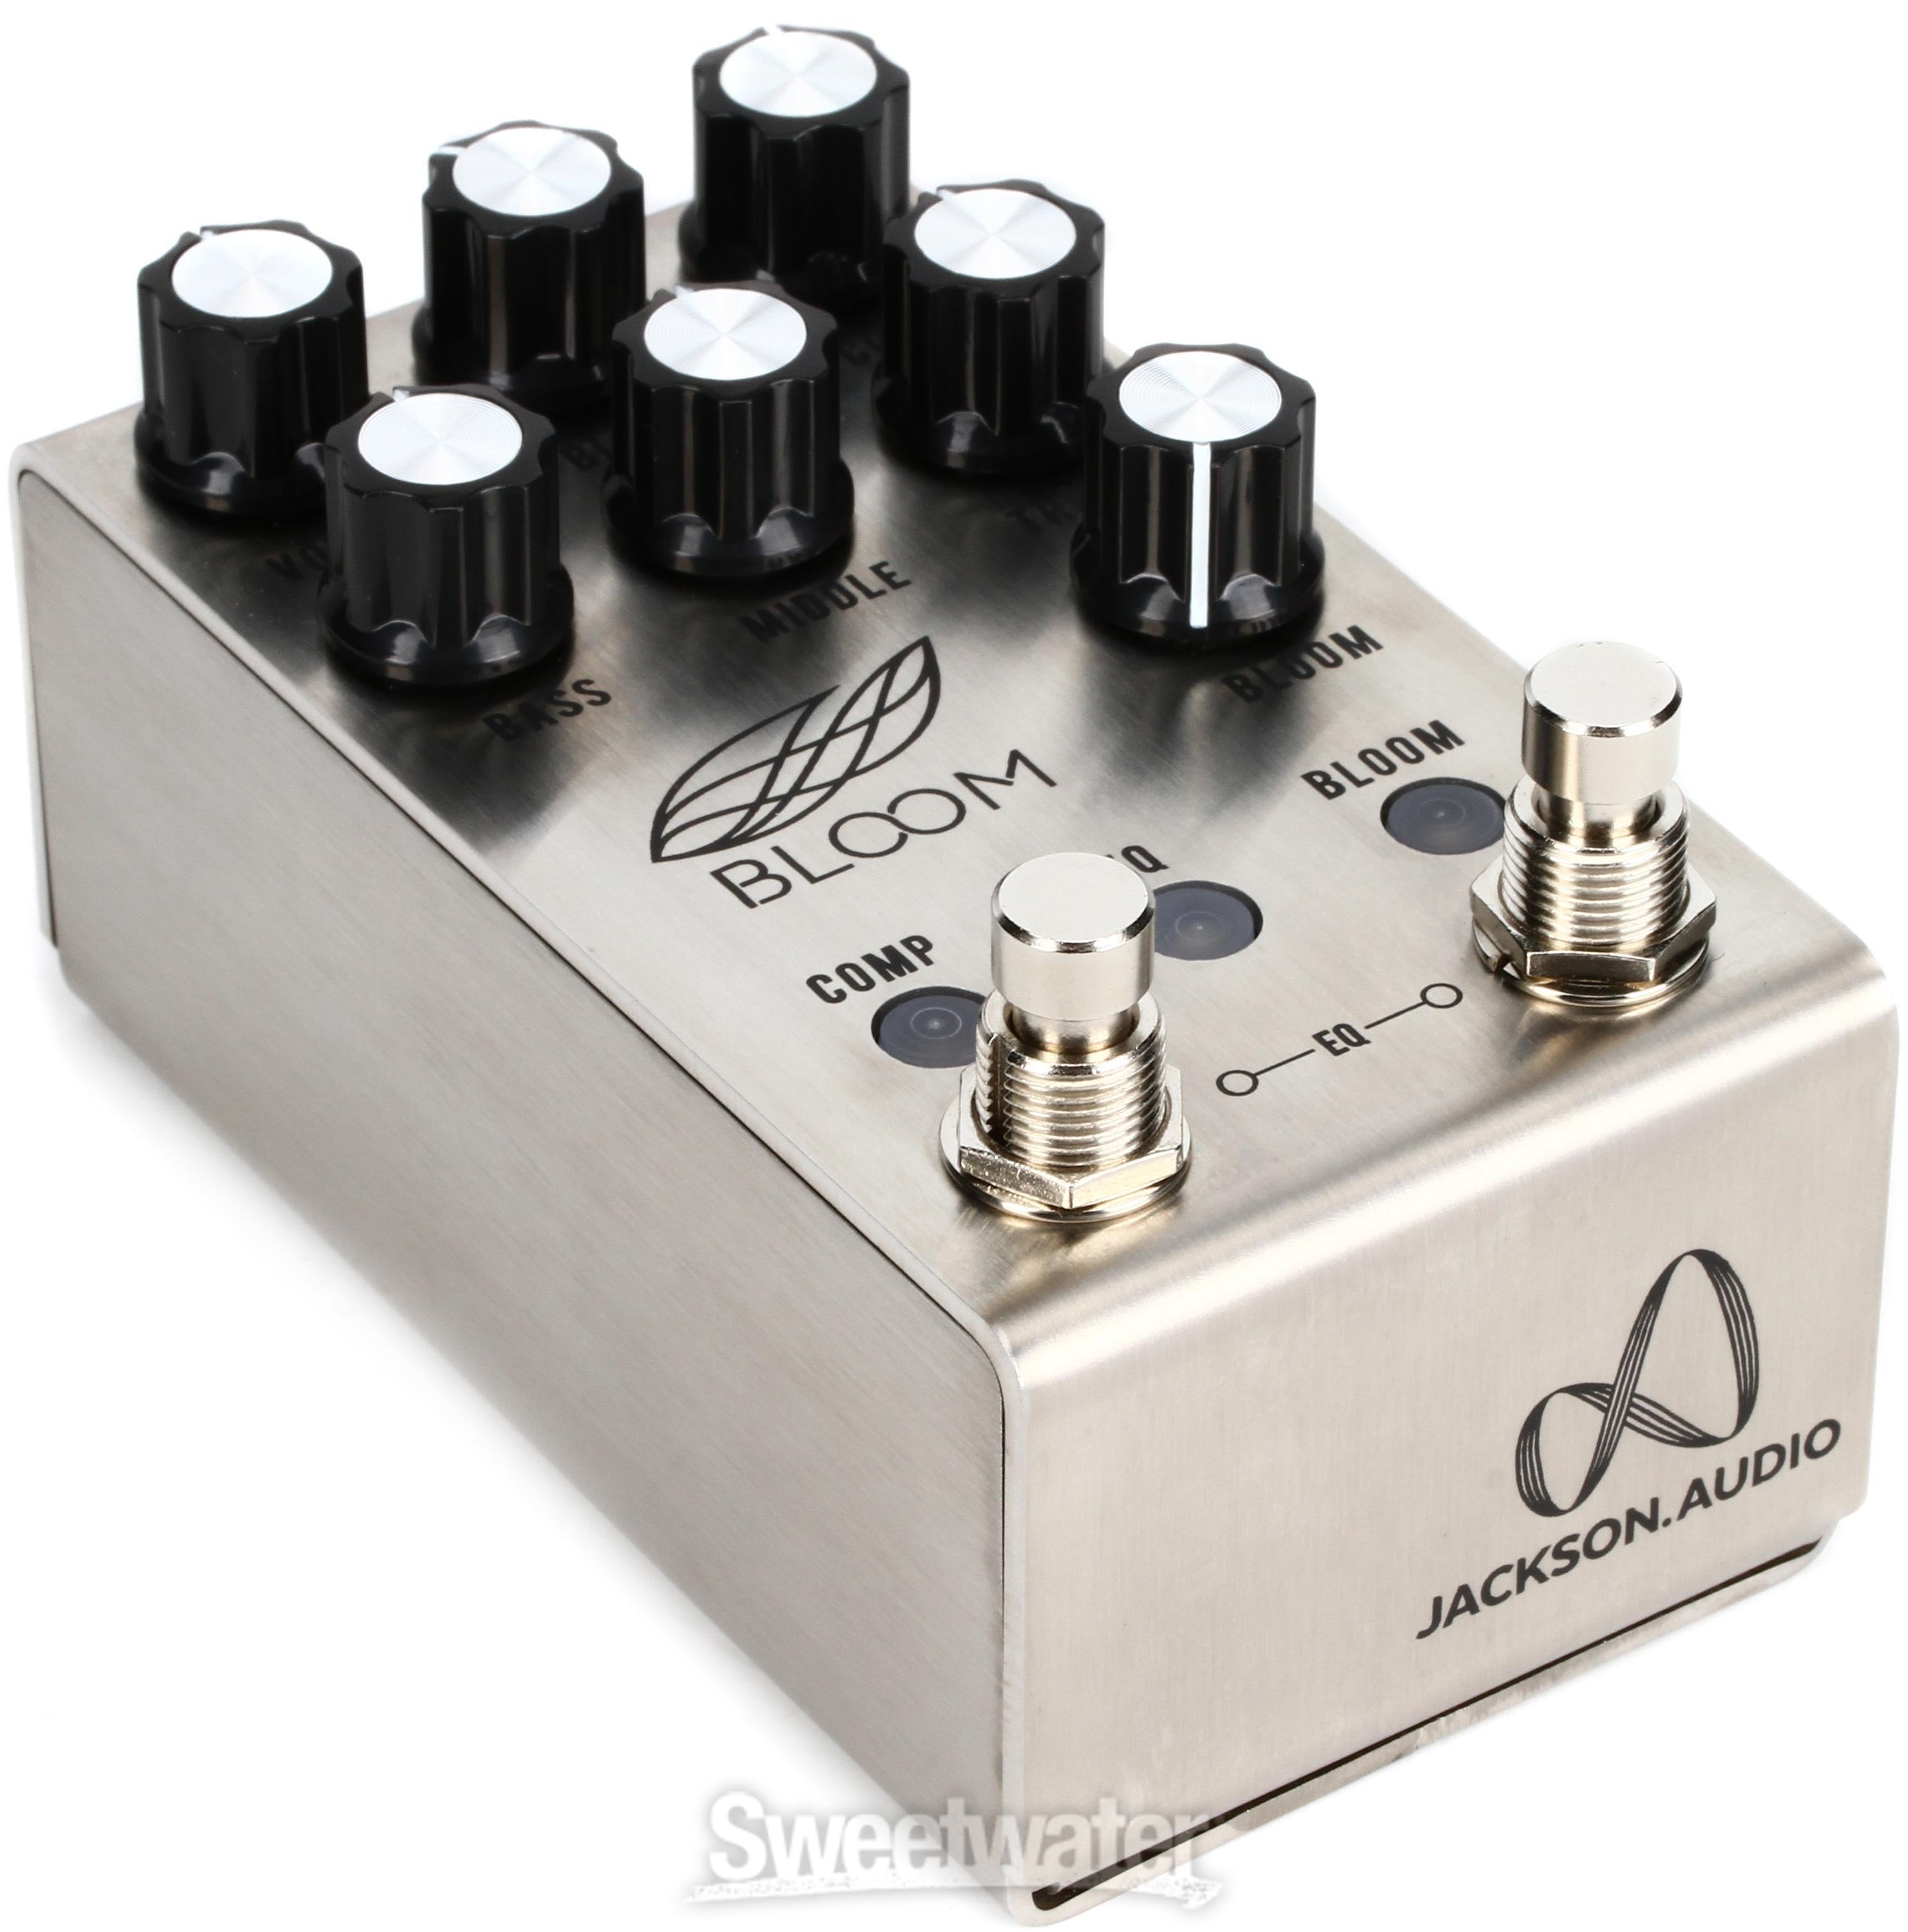 Jackson Audio Bloom Optical Compressor/EQ/Boost Pedal - Stainless